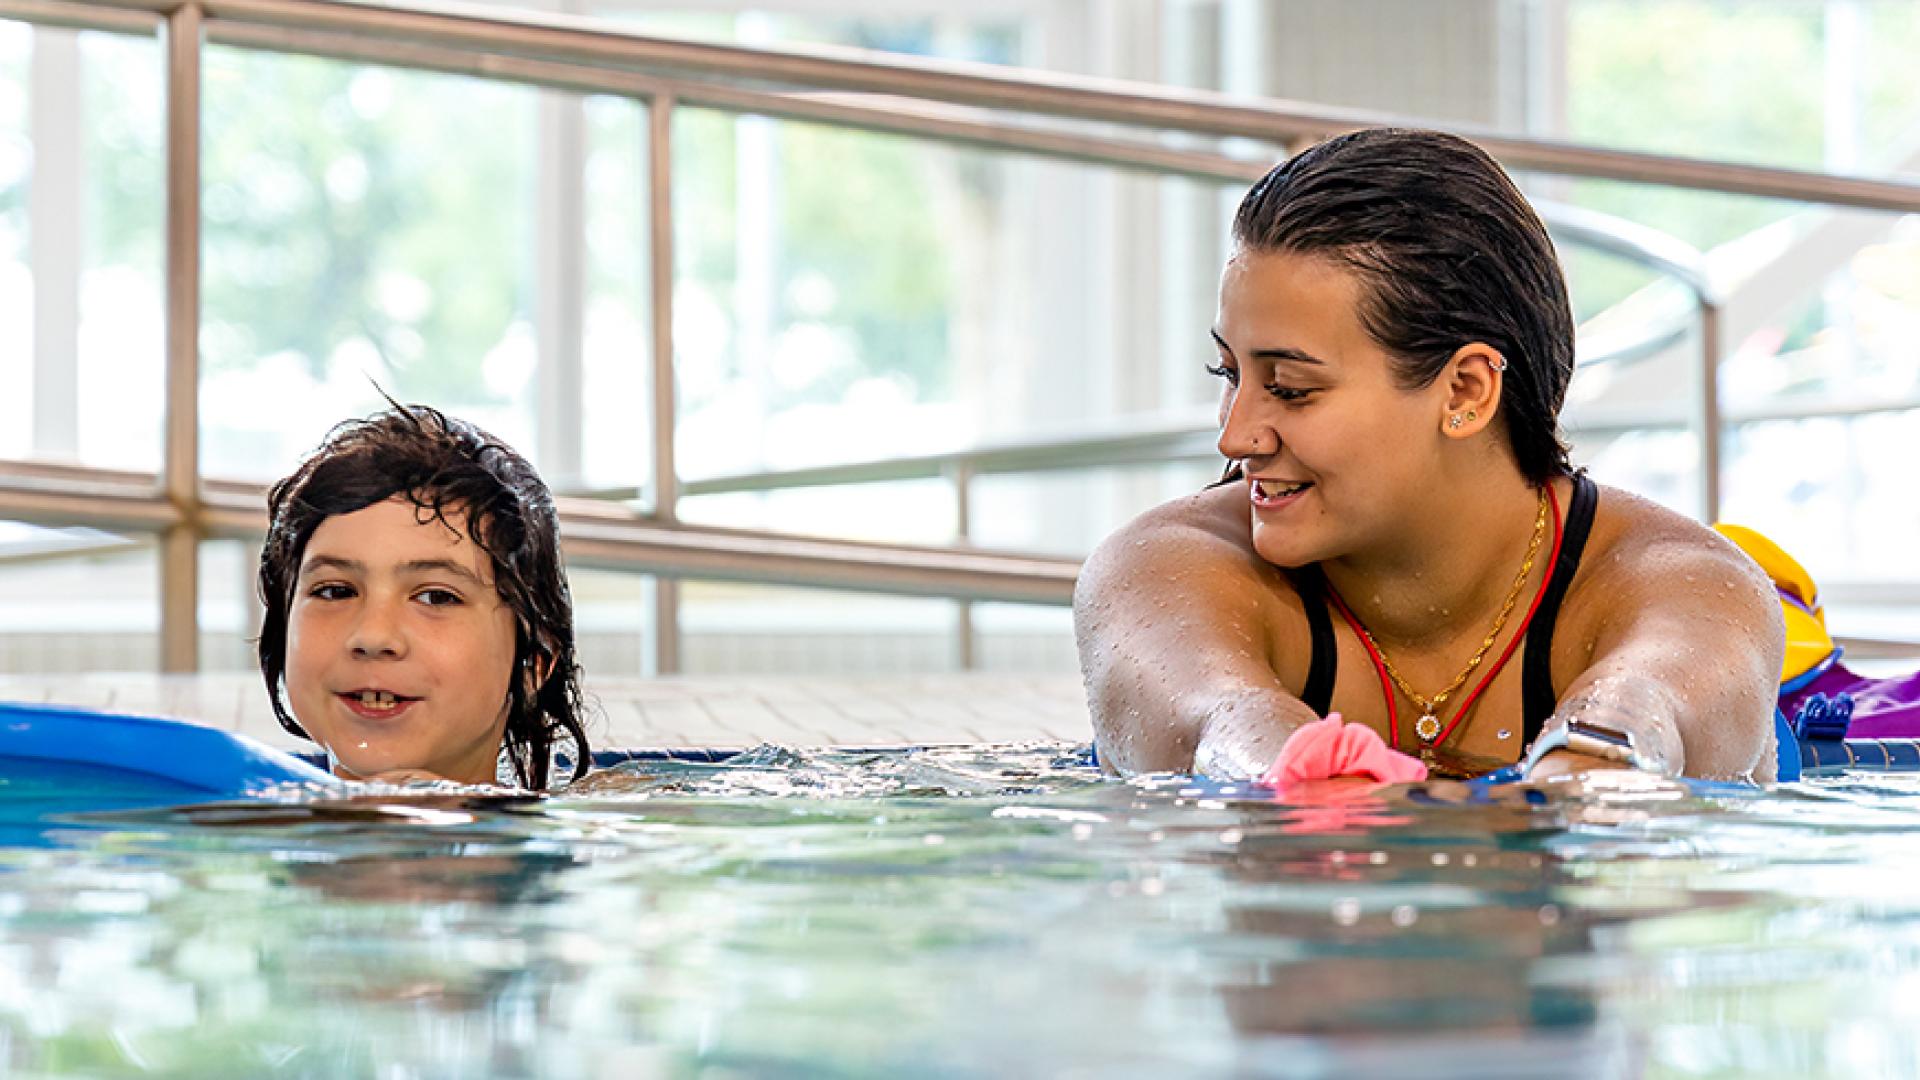 A child participates in swimming lessons at the Leisure Centre.